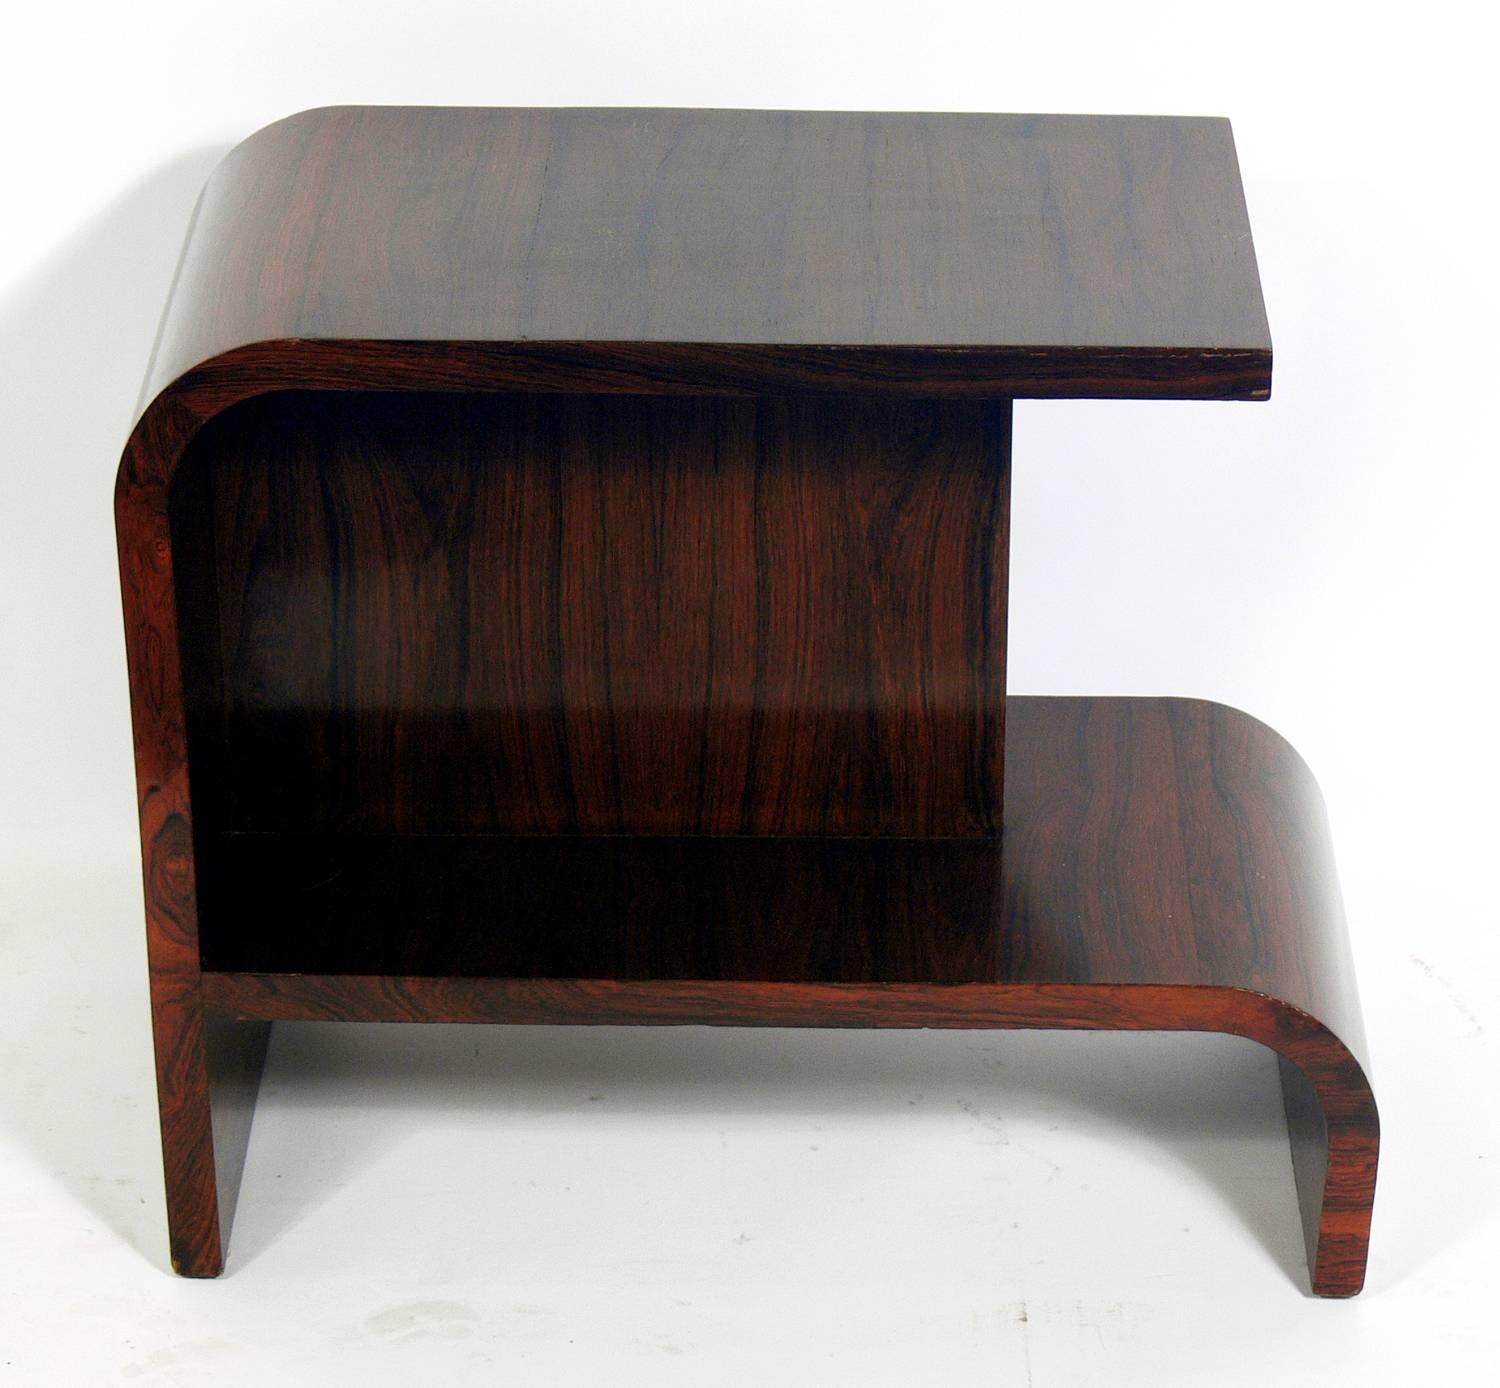 Streamlined Art Deco rosewood side wtable, probably American, circa 1930s. Retains original finish with warm original patina.